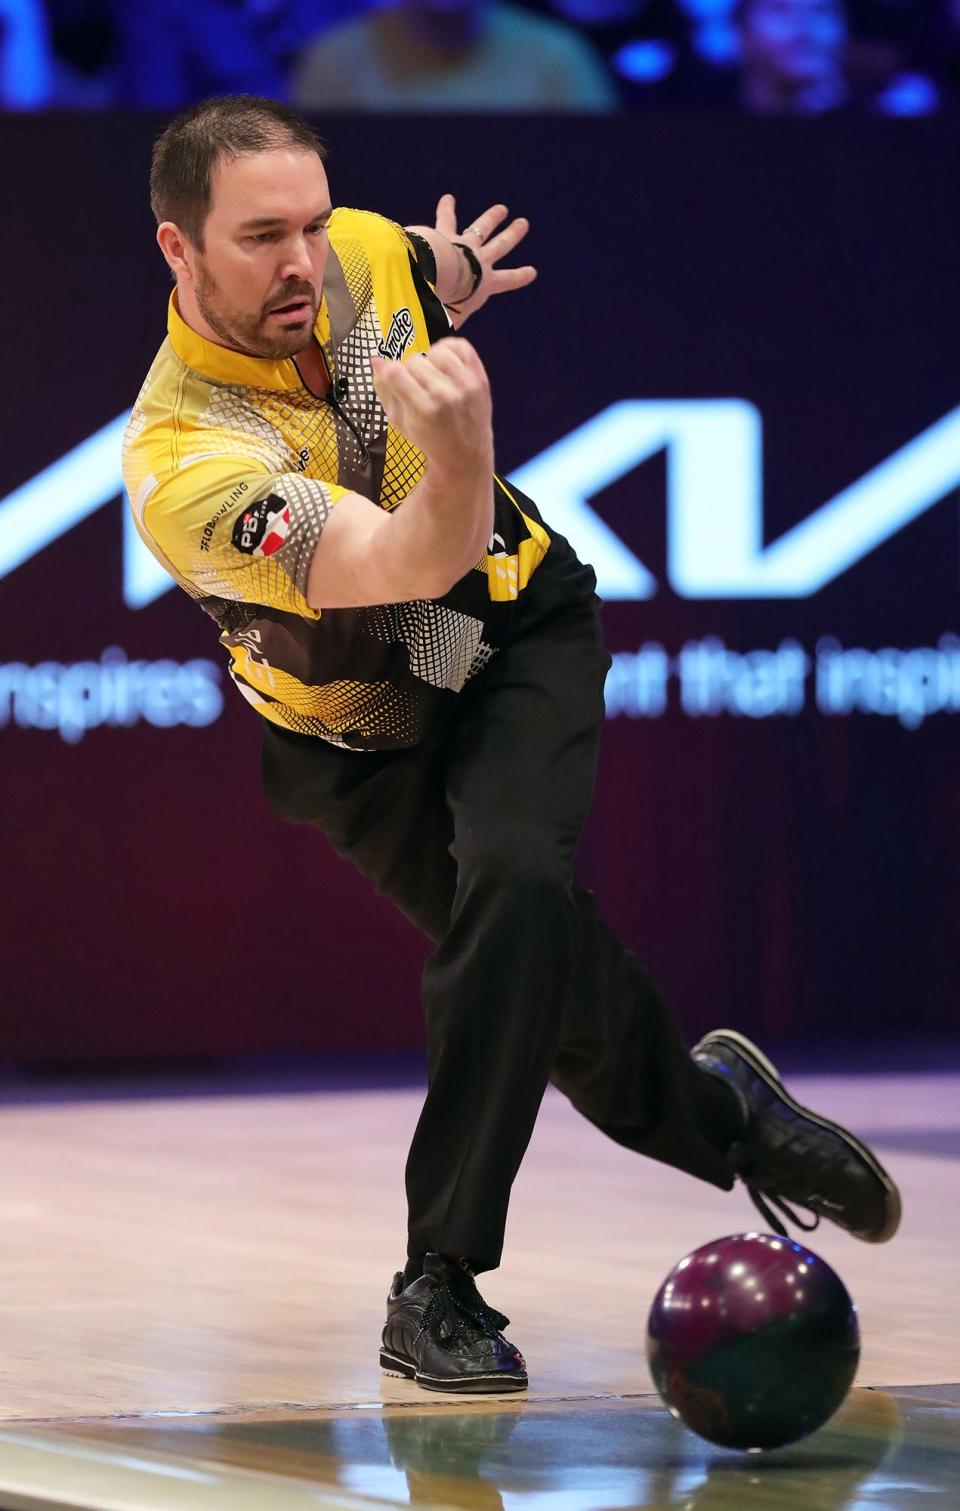 Sean Rash makes a roll down the lane during his match against Shawn Maldonado in the Kia PBA Tournament of Champions at AMF Riviera Lanes on Sunday.